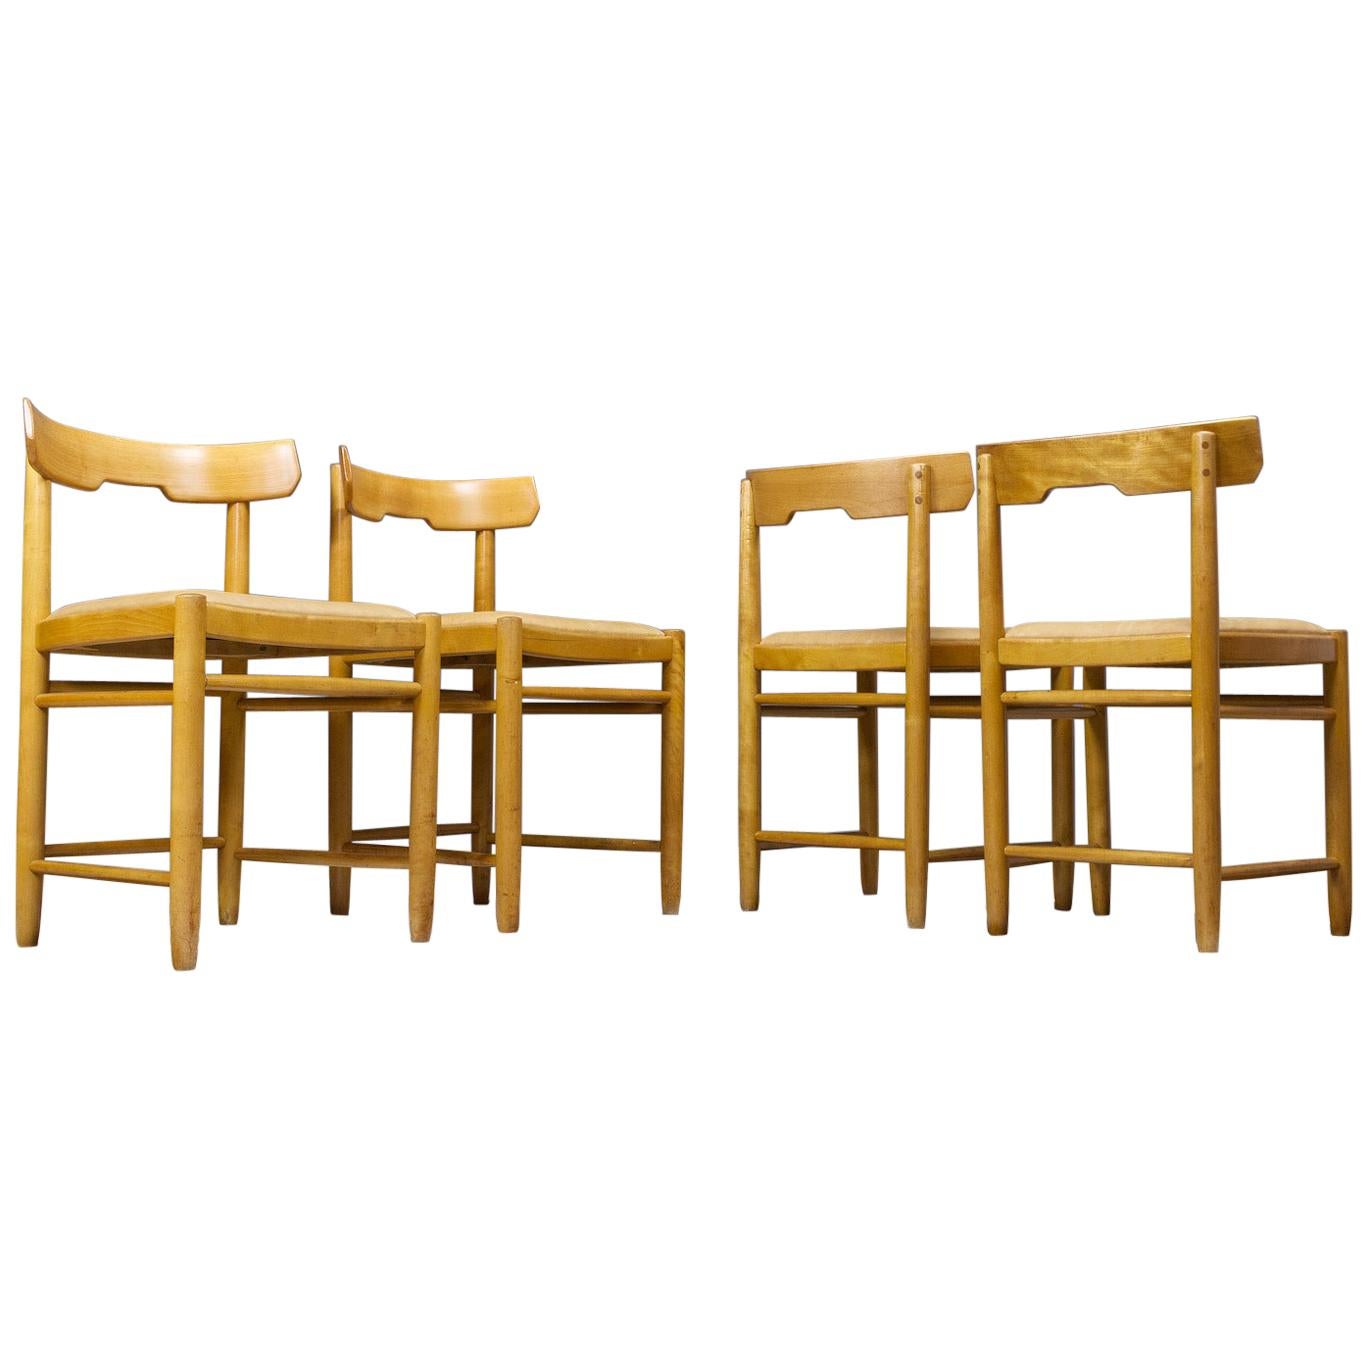 Scandinavian Modern Dining Chairs in Beech and Tan Leather, 1960s Set of 4 For Sale